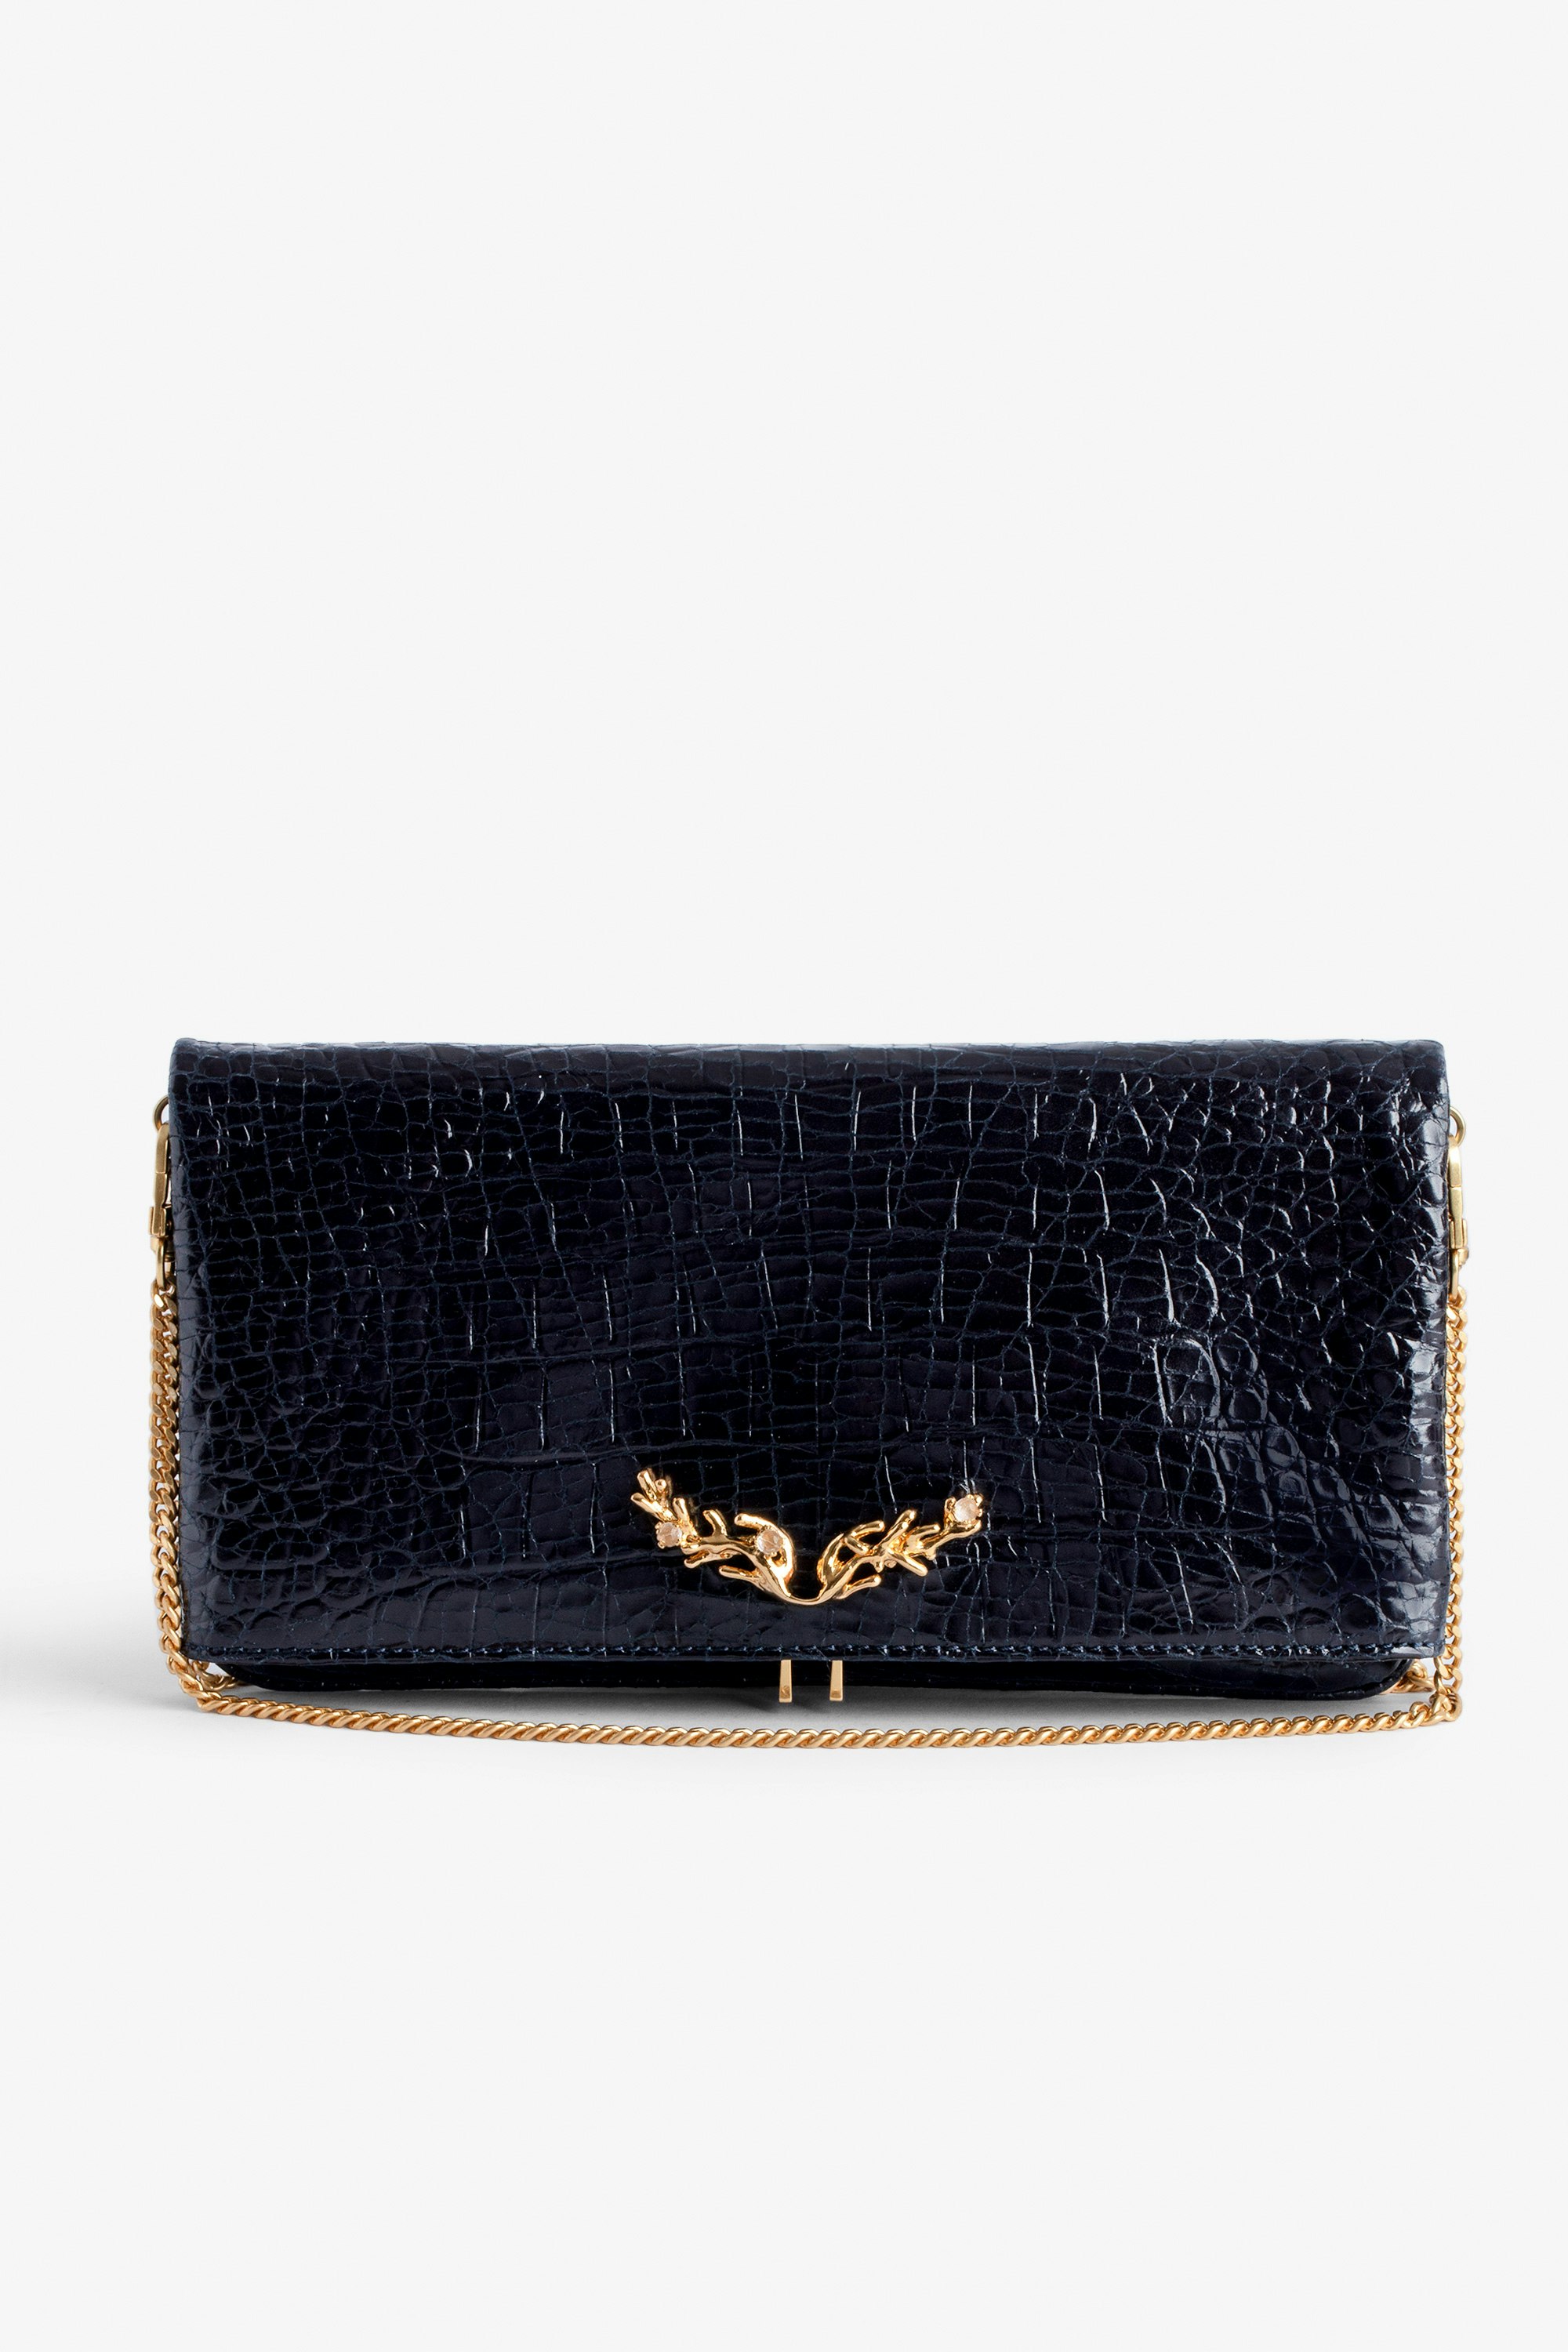 Rock Embossed Clutch - Rock navy blue croc-embossed leather clutch with gold-tone metal chain.